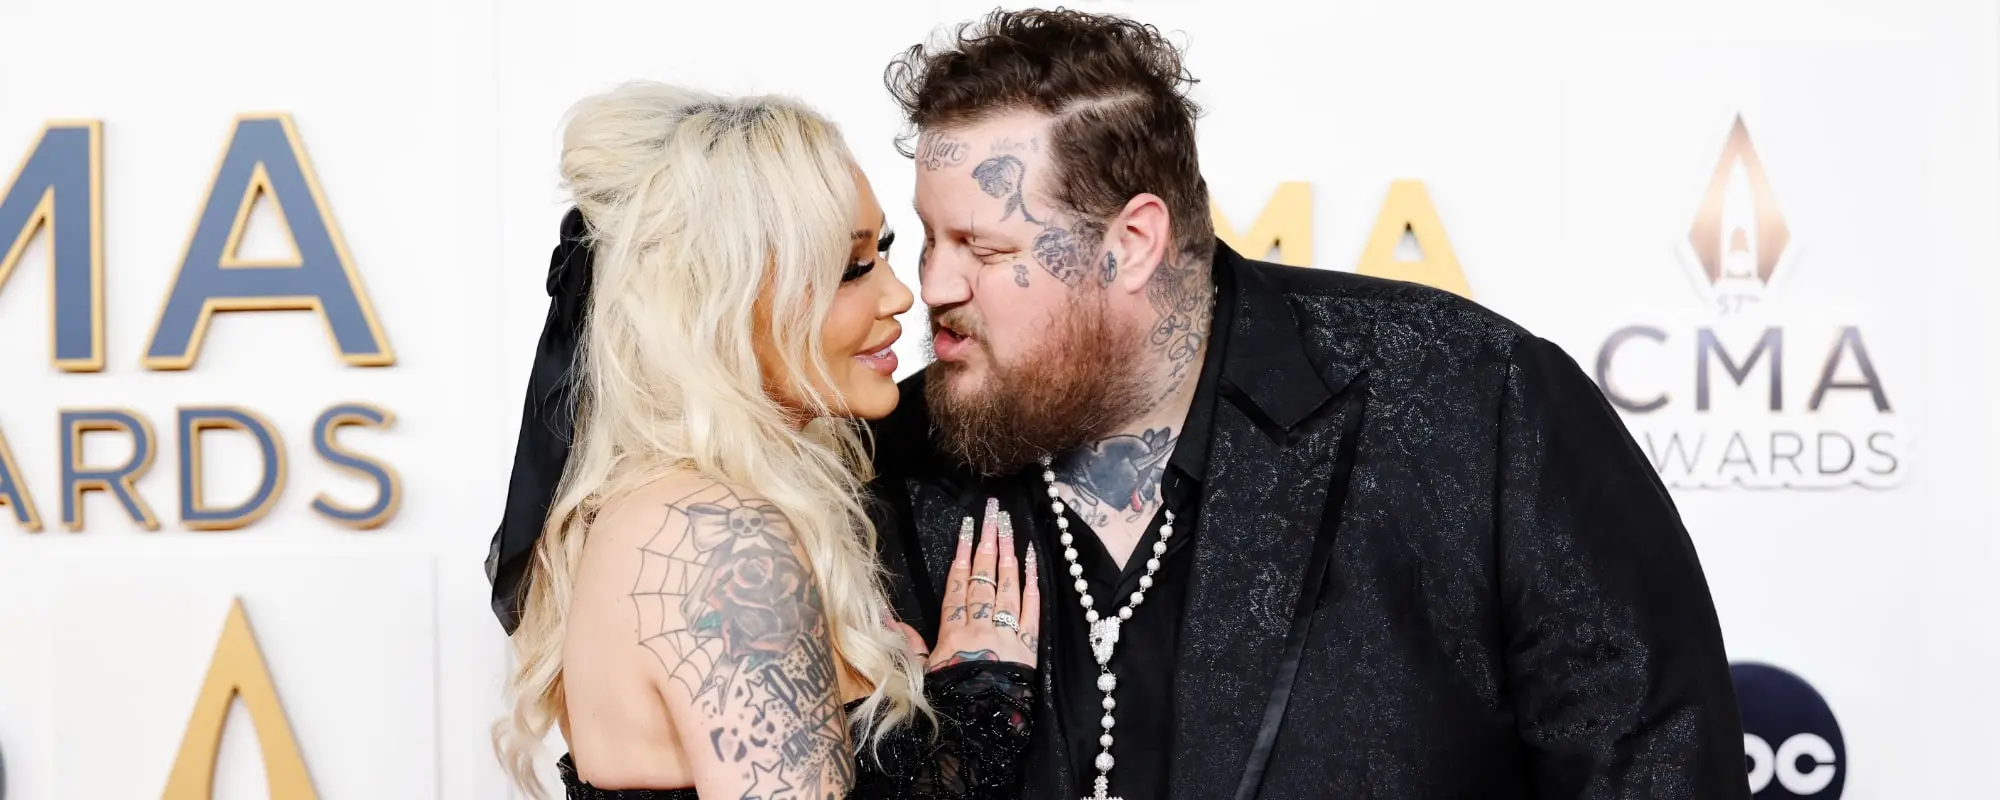 Watch Jelly Roll Celebrate Wife Bunnie Xo’s Birthday with Emotional Montage: “This Woman Is My Safe Space”